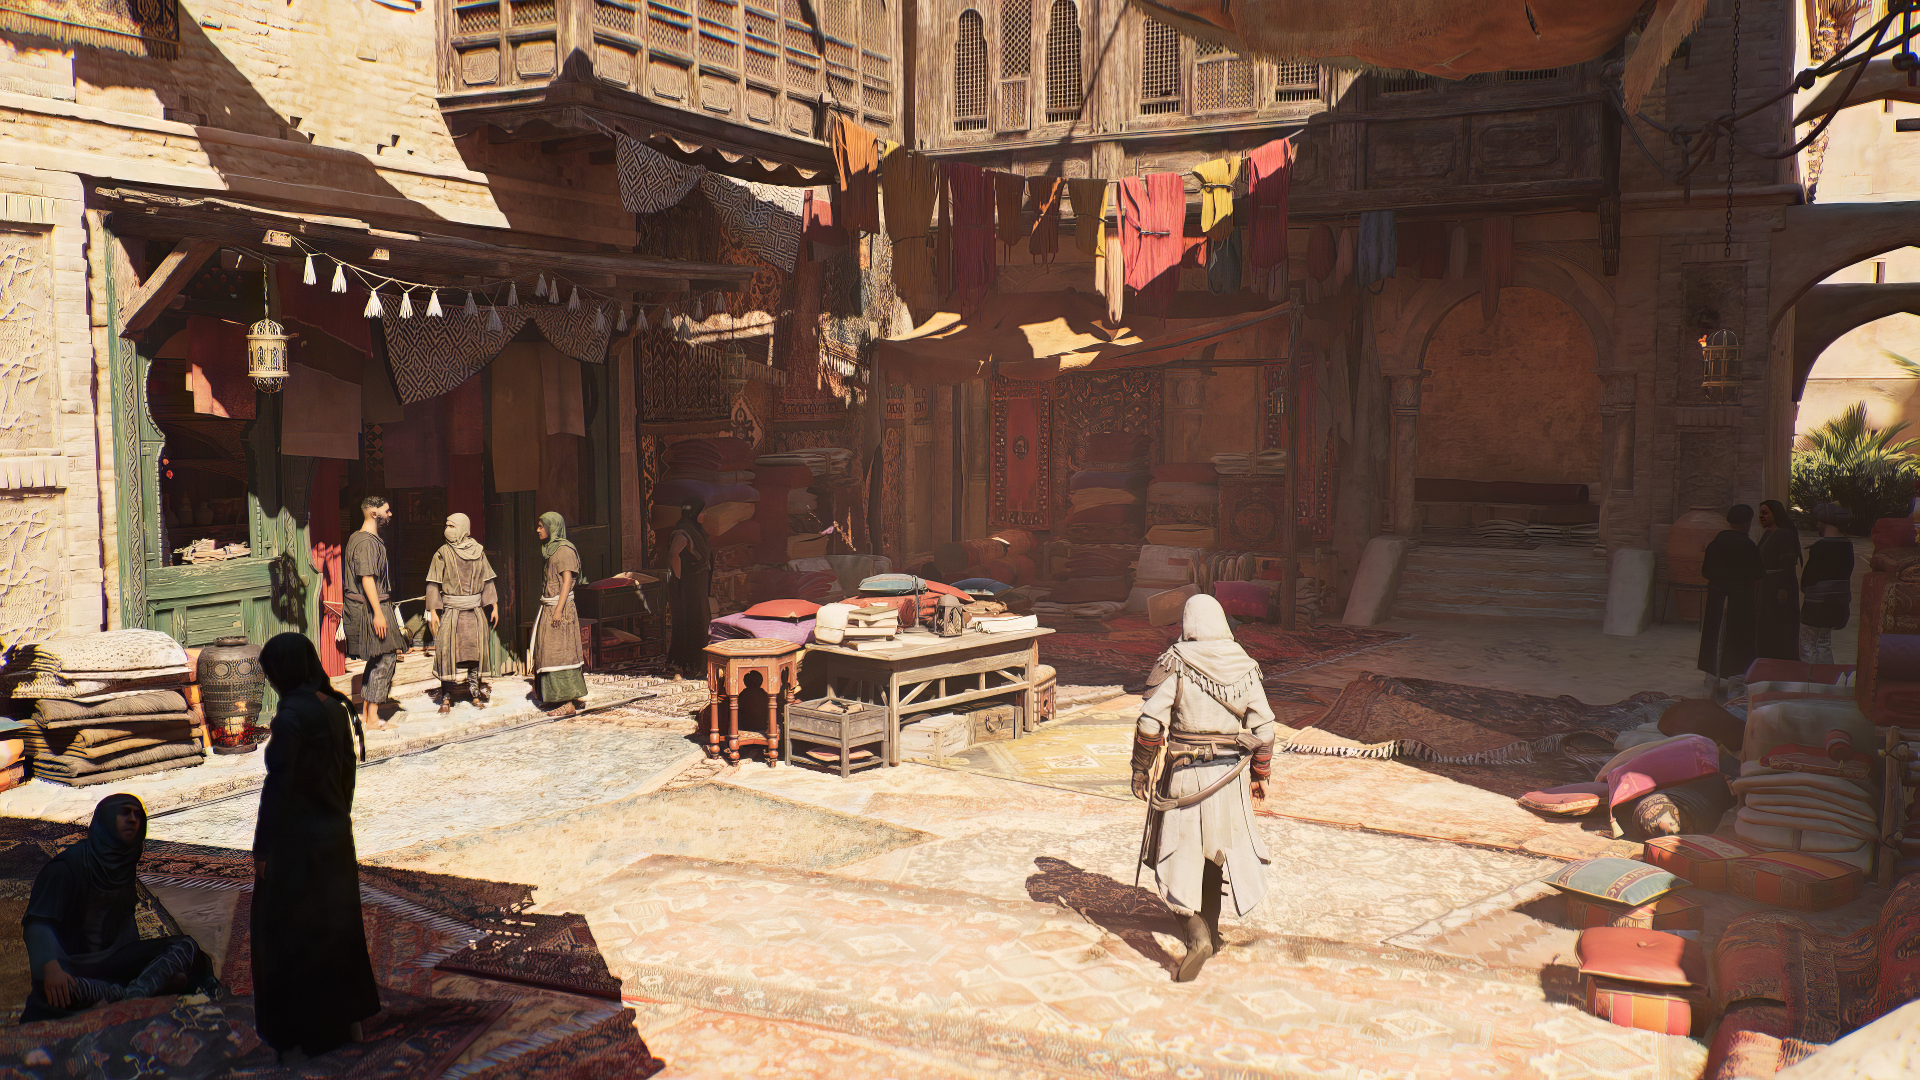 HD wallpaper of Assassin's Creed Mirage featuring a character in a bustling market scene from the game.